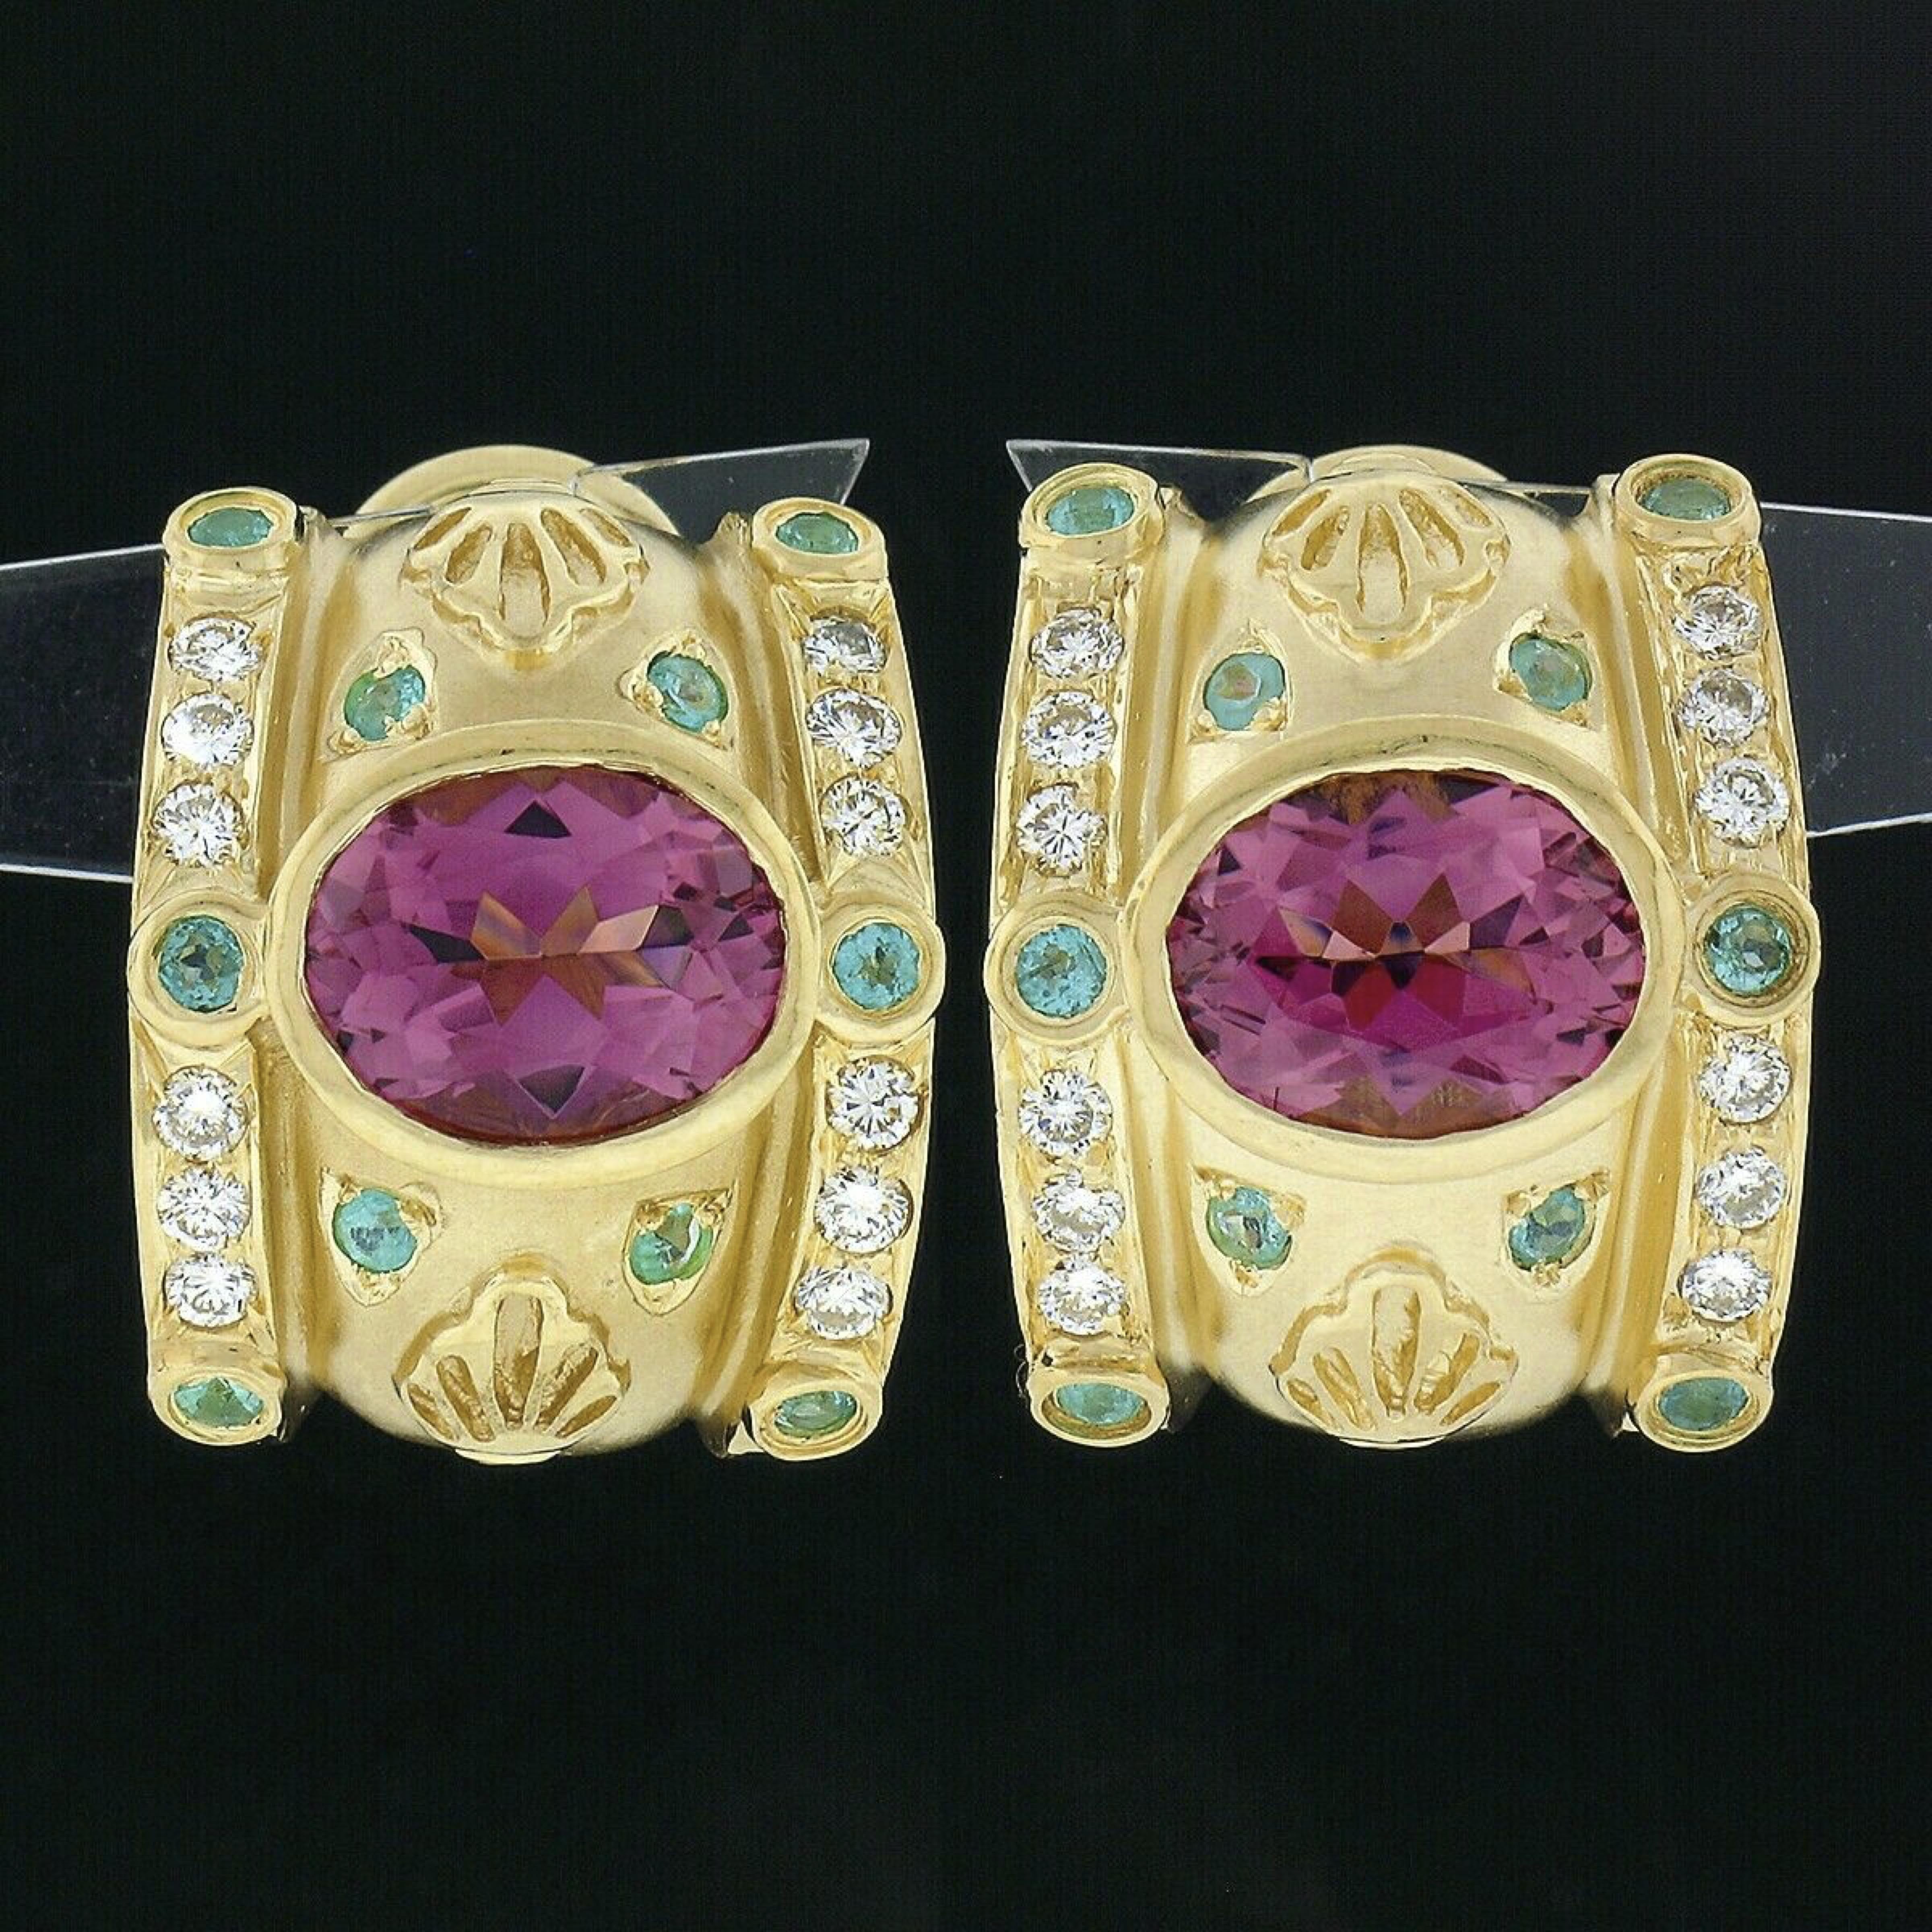 These gorgeous and well made cuff earrings are crafted in solid 18k yellow gold and are set with very fine quality stones throughout their wide and truly elegant design. They each feature an oval brilliant cut pink tourmaline neatly bezel set the